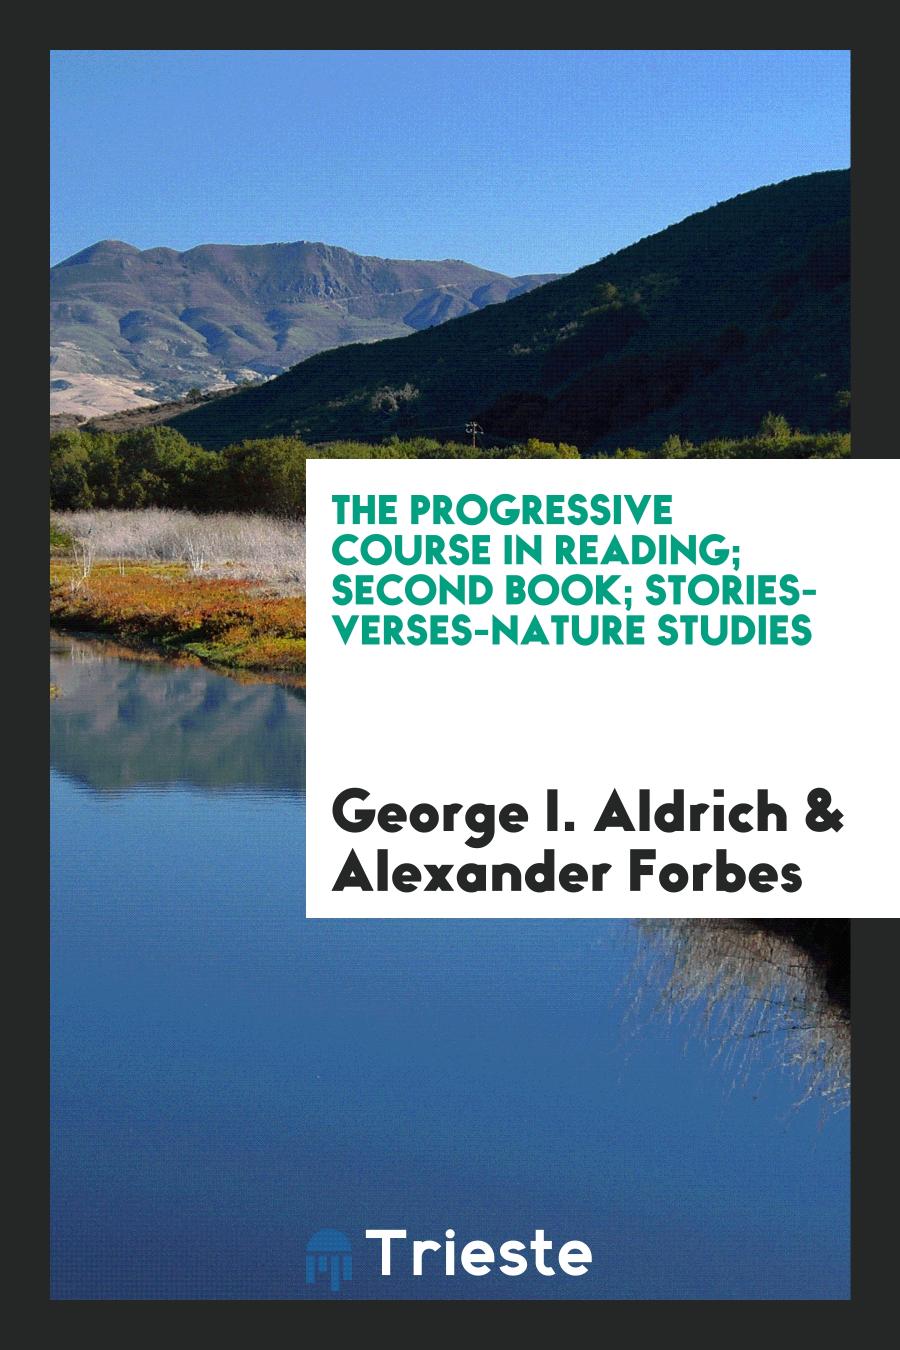 The Progressive Course in Reading; Second Book; Stories-Verses-Nature Studies